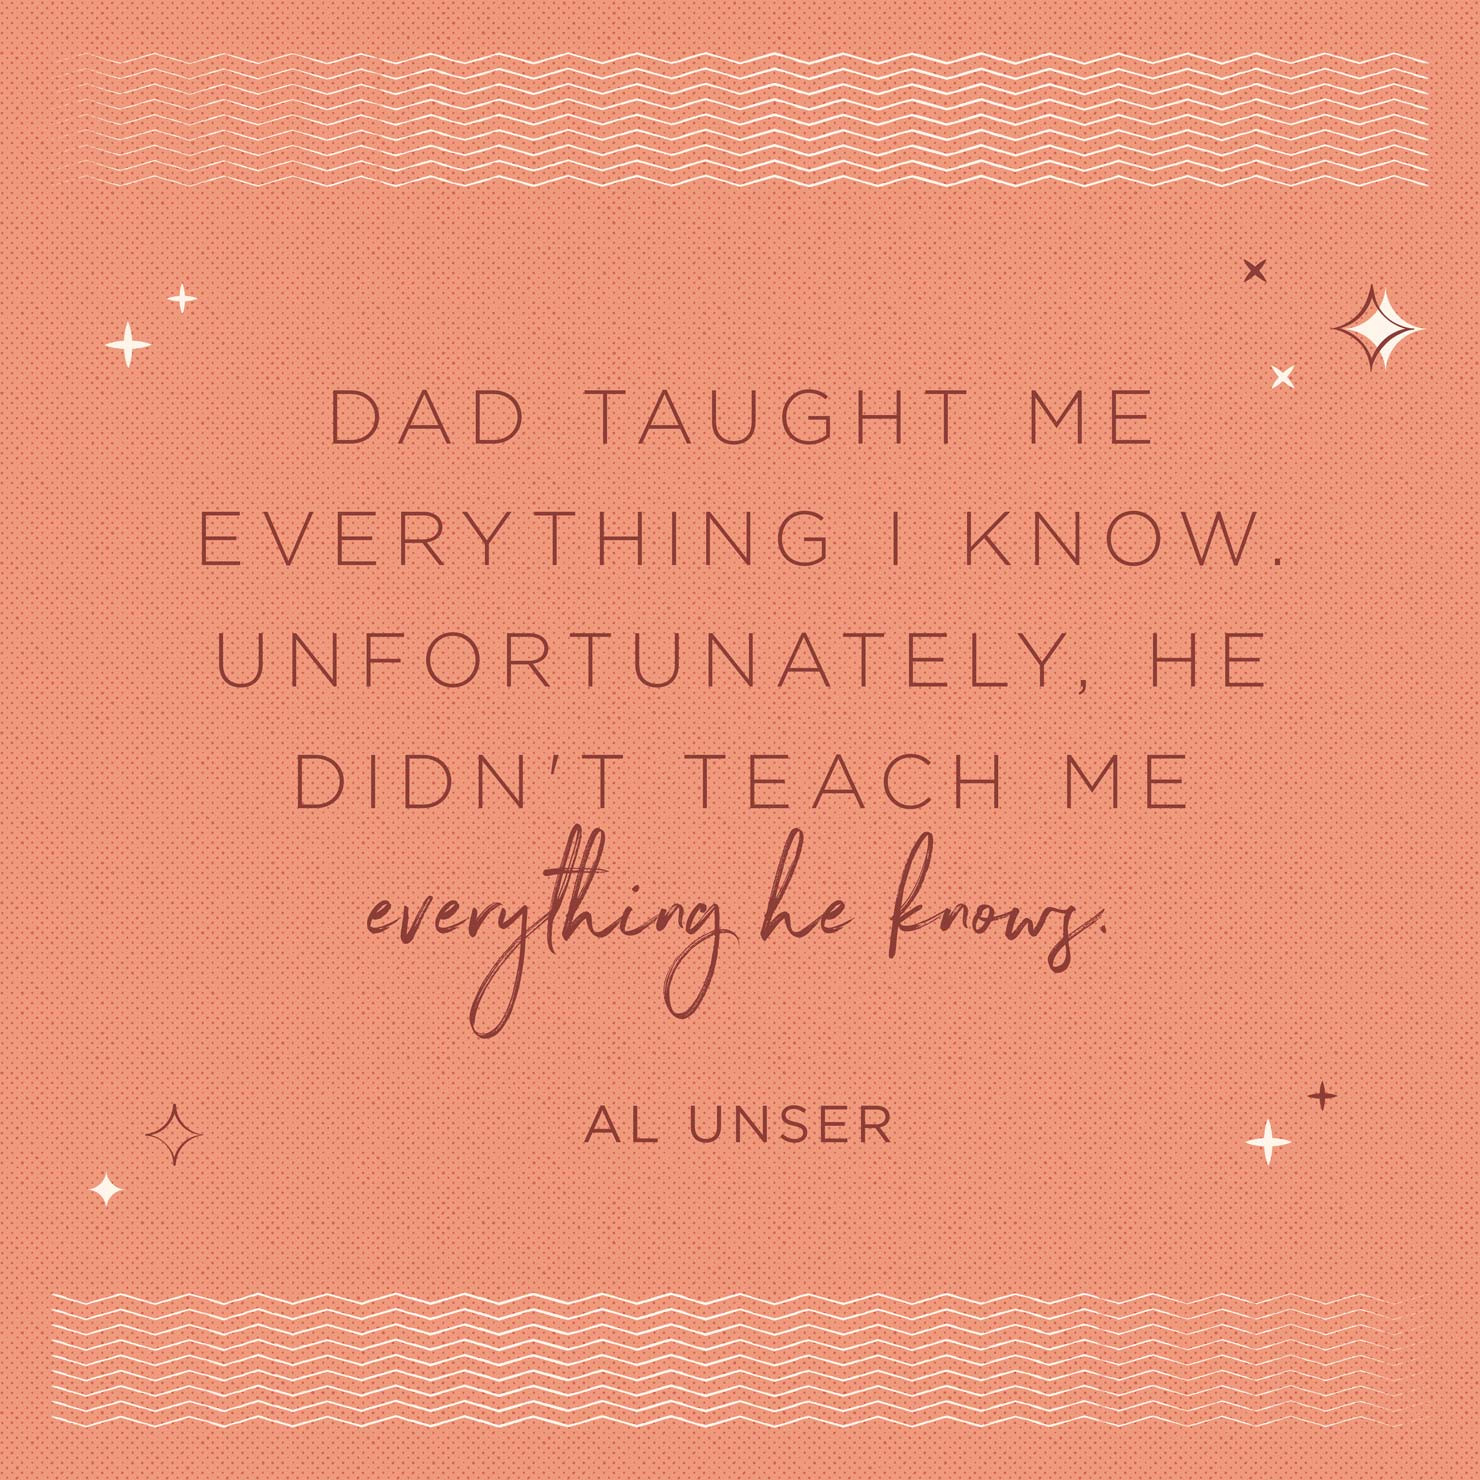 Fathers Day Funny Quotes
 100 Happy Father’s Day Quotes [2019]